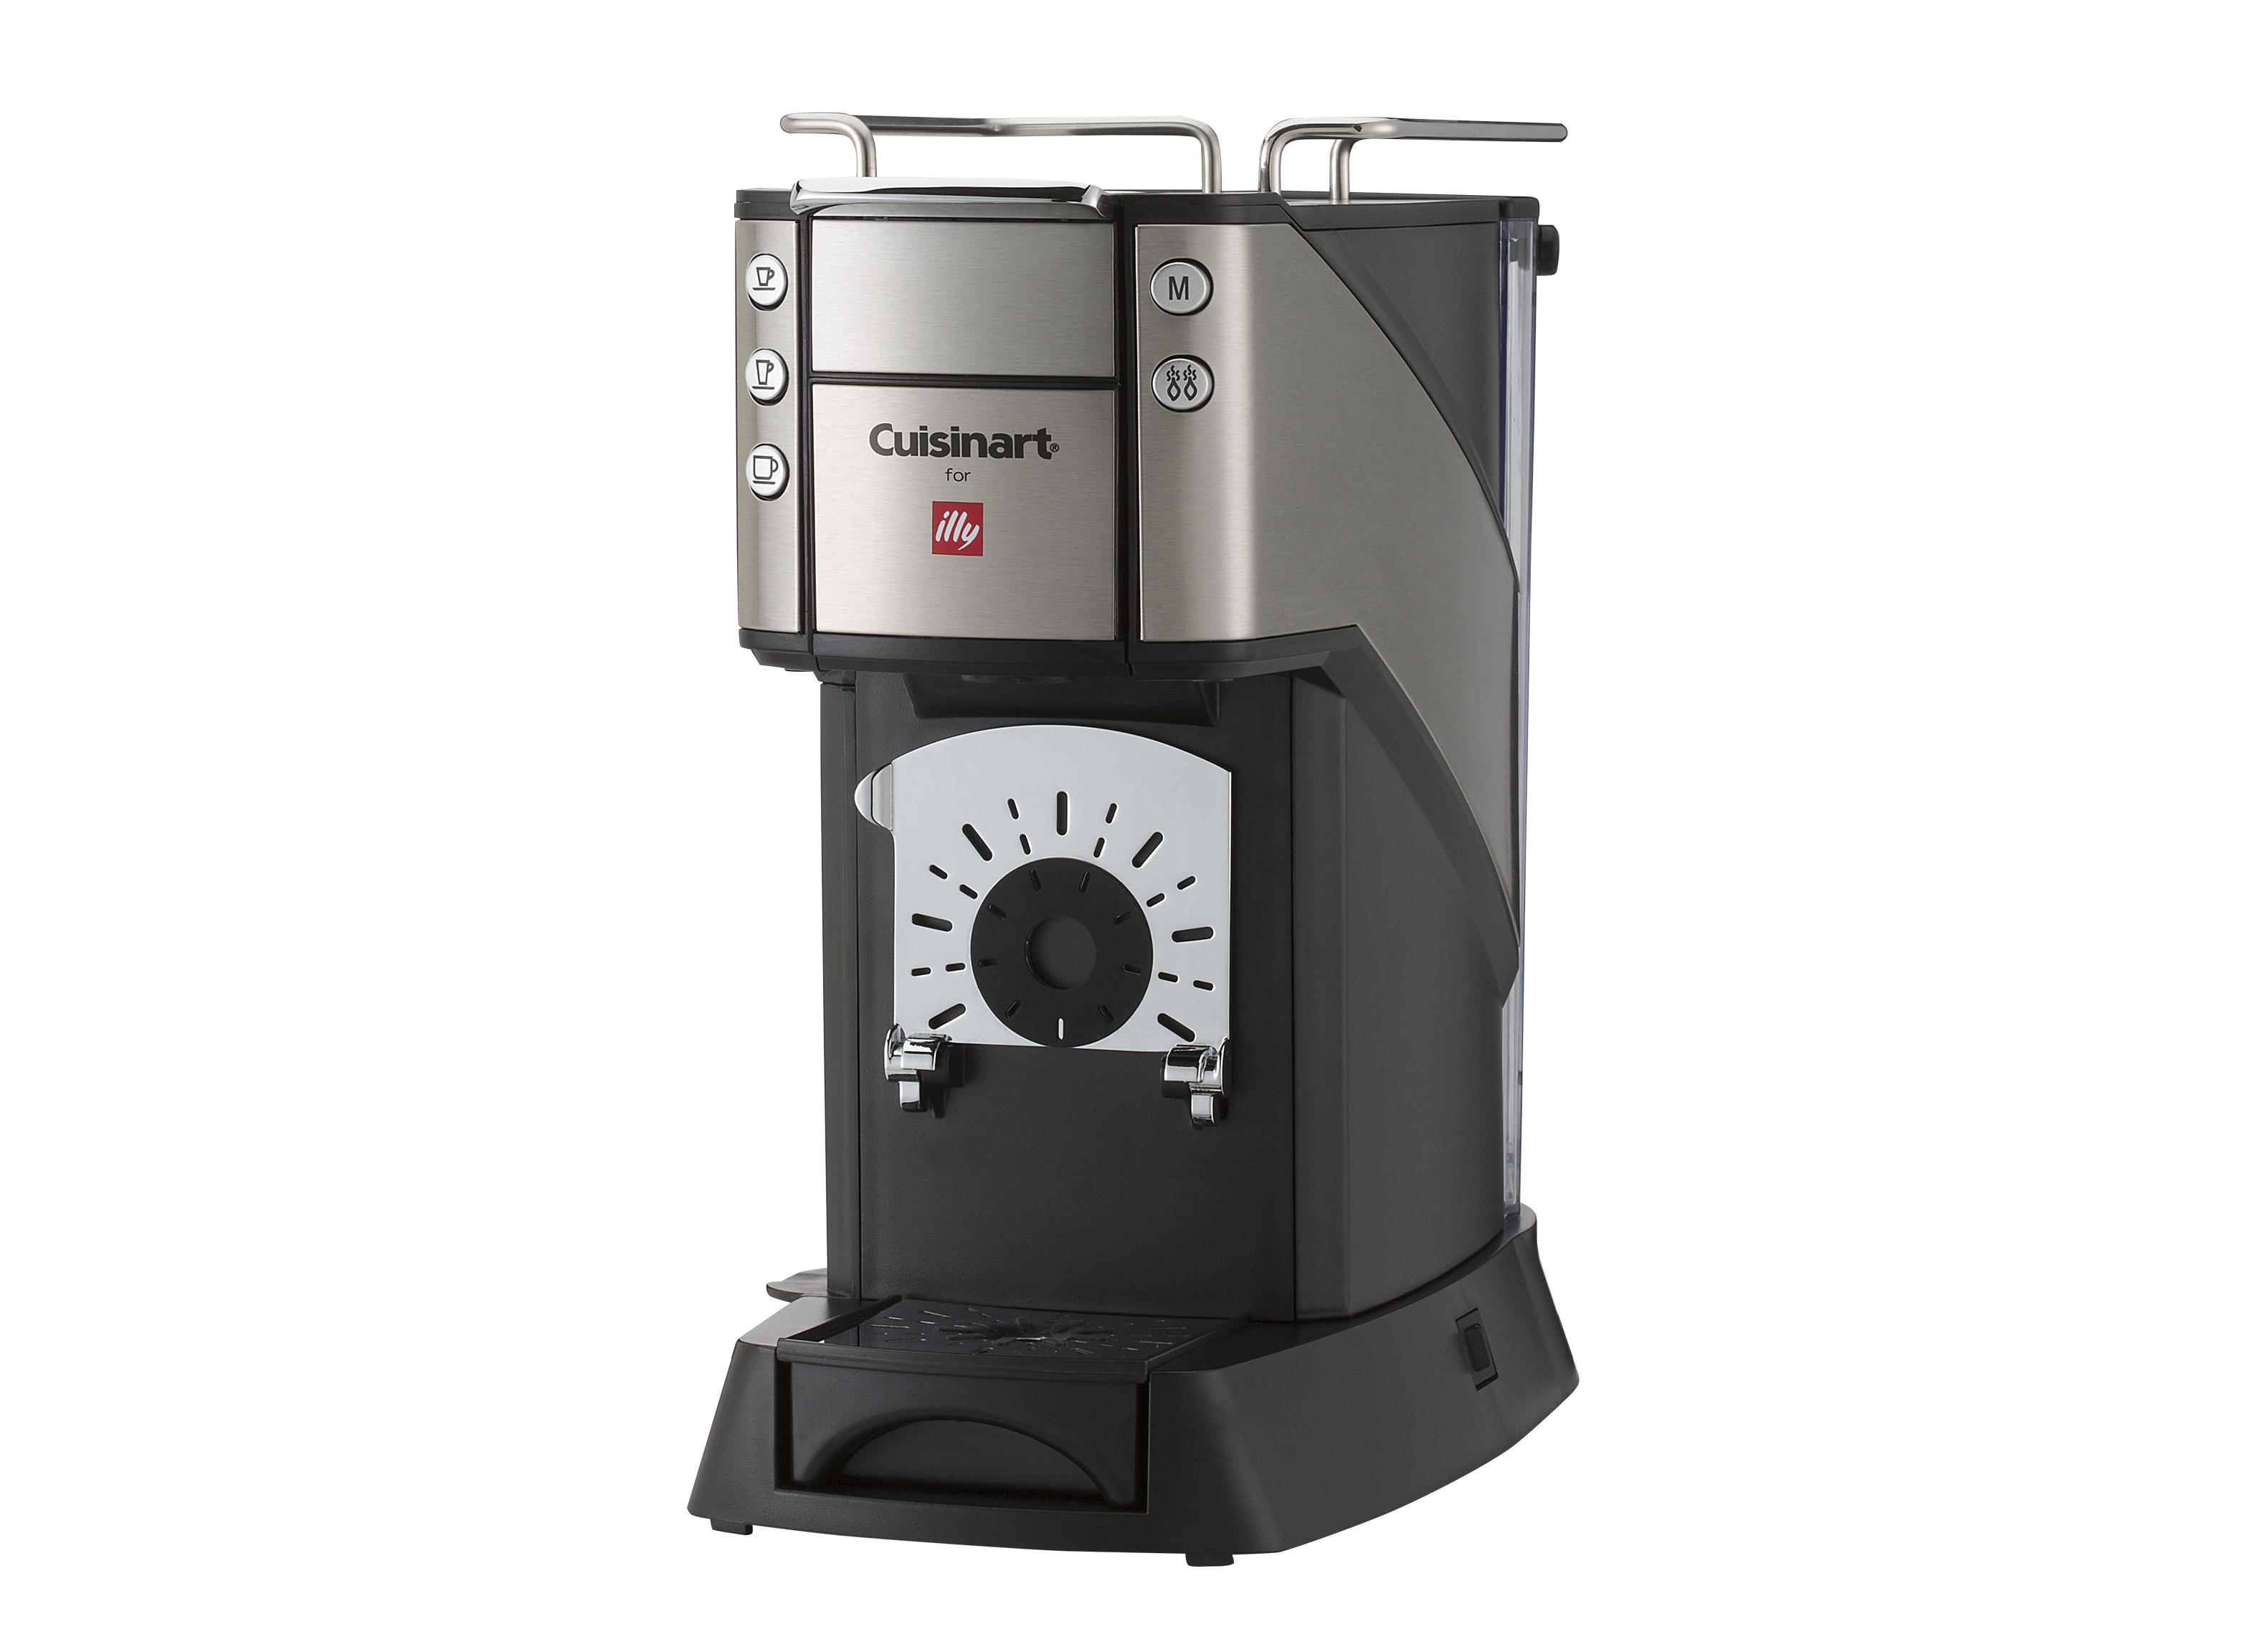 https://crdms.images.consumerreports.org/prod/products/cr/models/383011-podcoffeemakers-cuisinart-illybuonatazzaem400.png